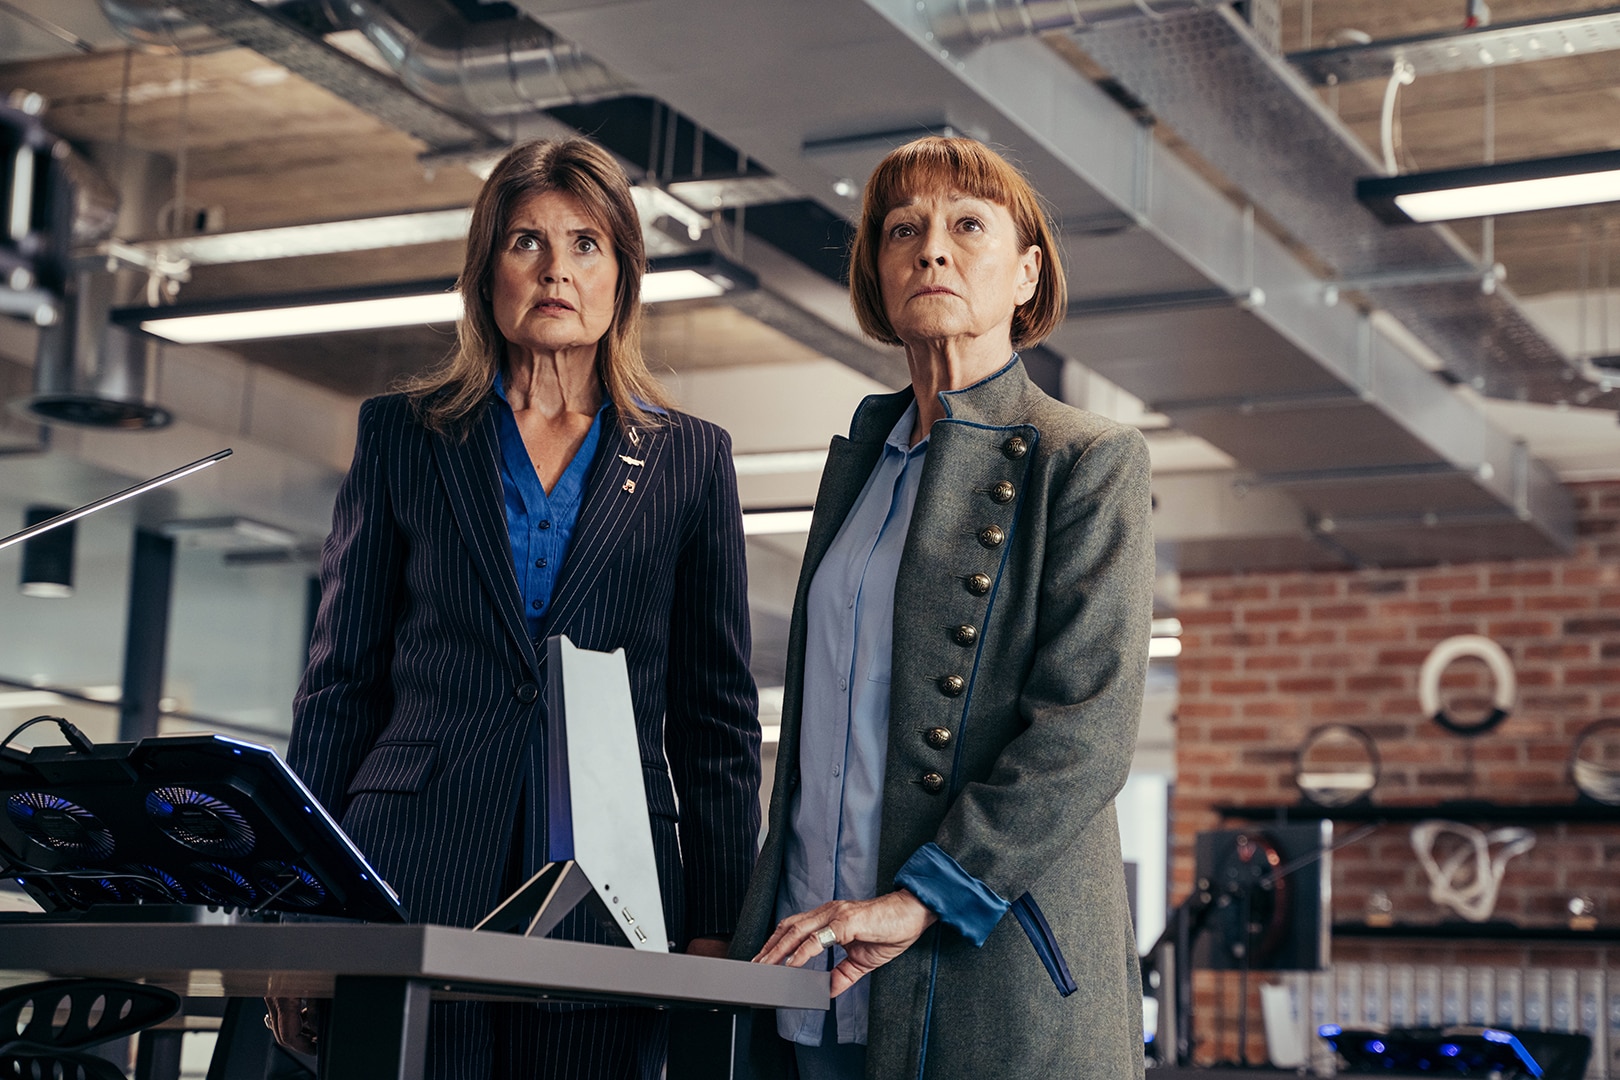 Sophie Aldred as Ace and Janet Fielding as Tegan in The Power of the Doctor